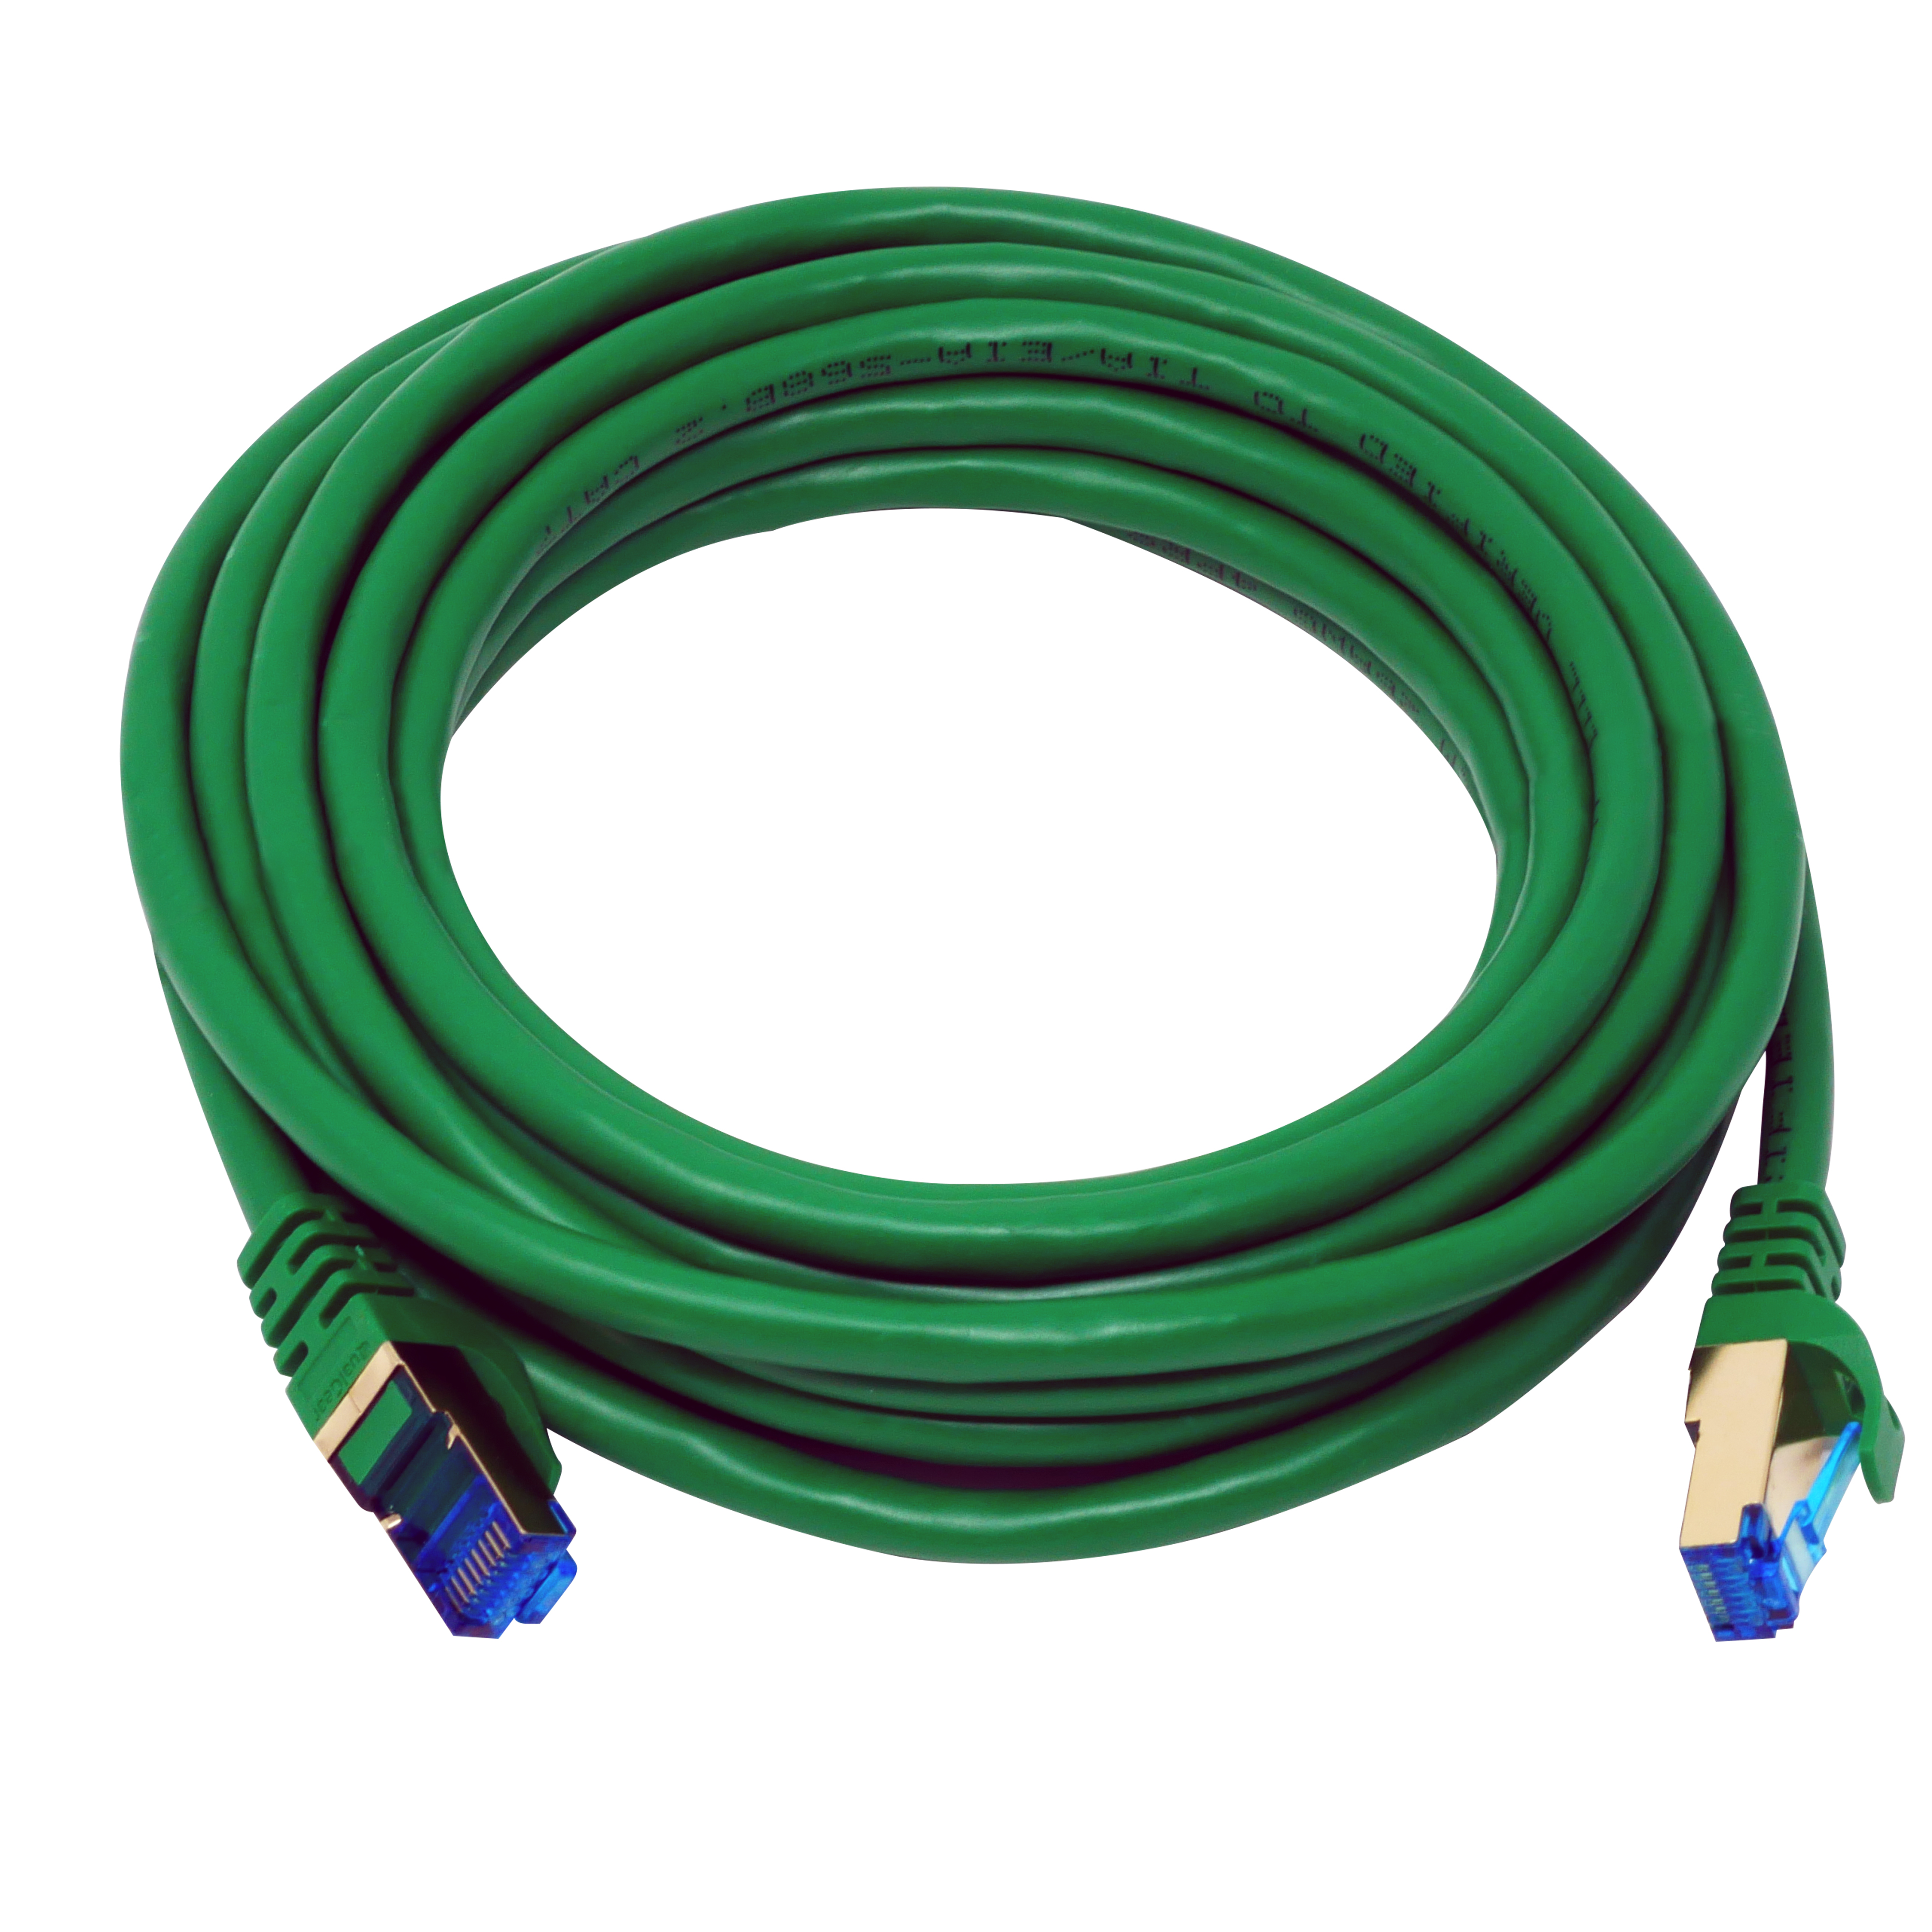 QualGear QG-CAT7R-10FT-GRN CAT 7 S/FTP Ethernet Cable Length 10 feet - 26 AWG, 10 Gbps, Gold Plated Contacts, RJ45, 99.99% OFC Copper, Color Green 